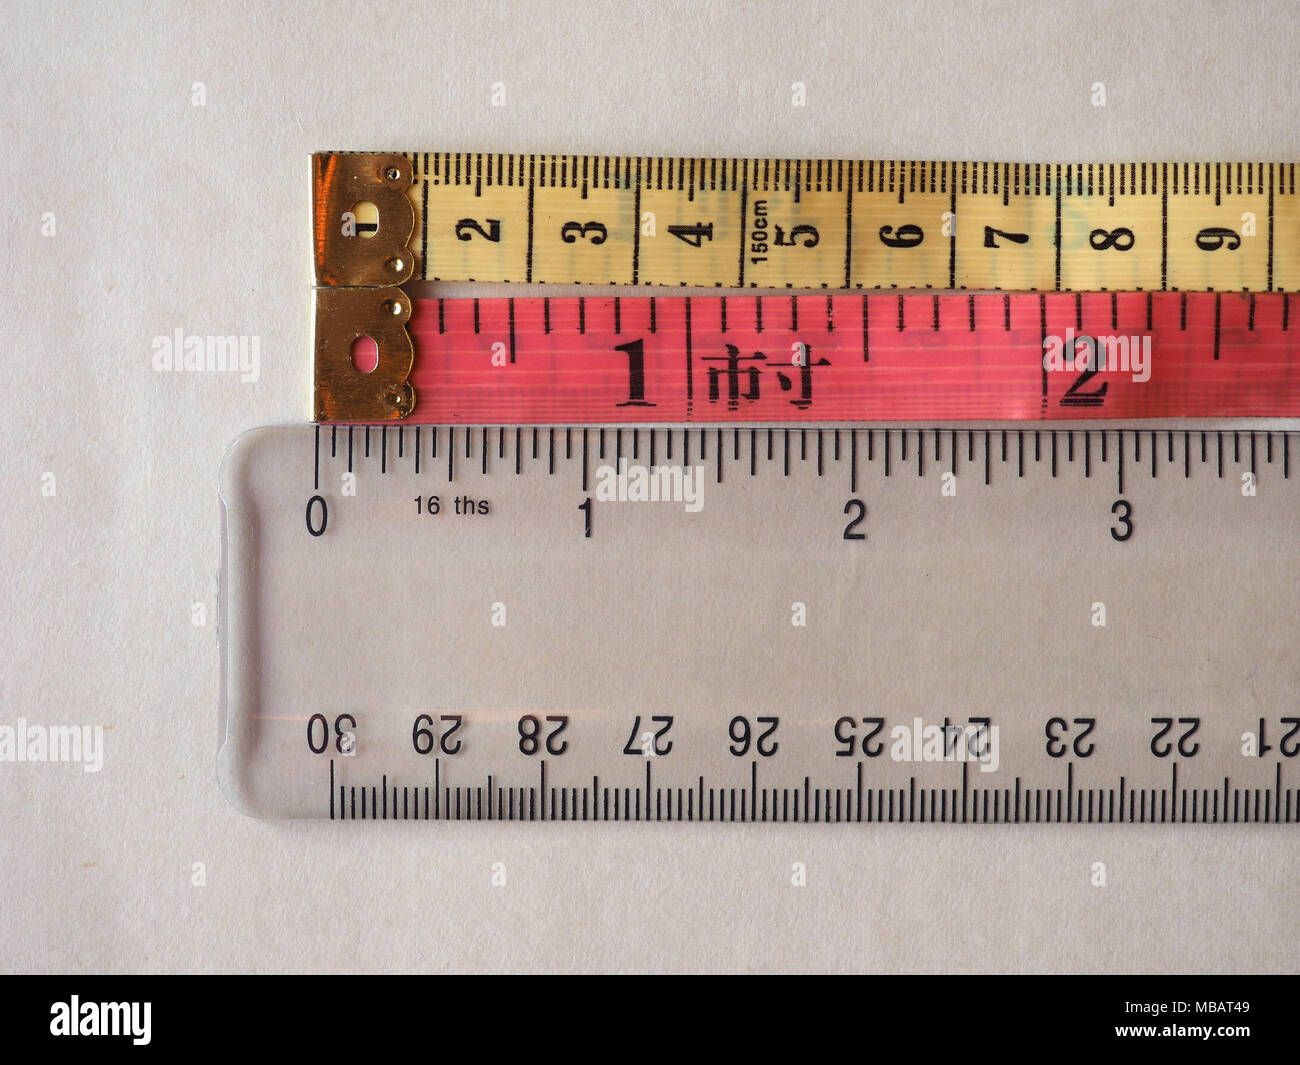 How to read a tailor measuring tape?